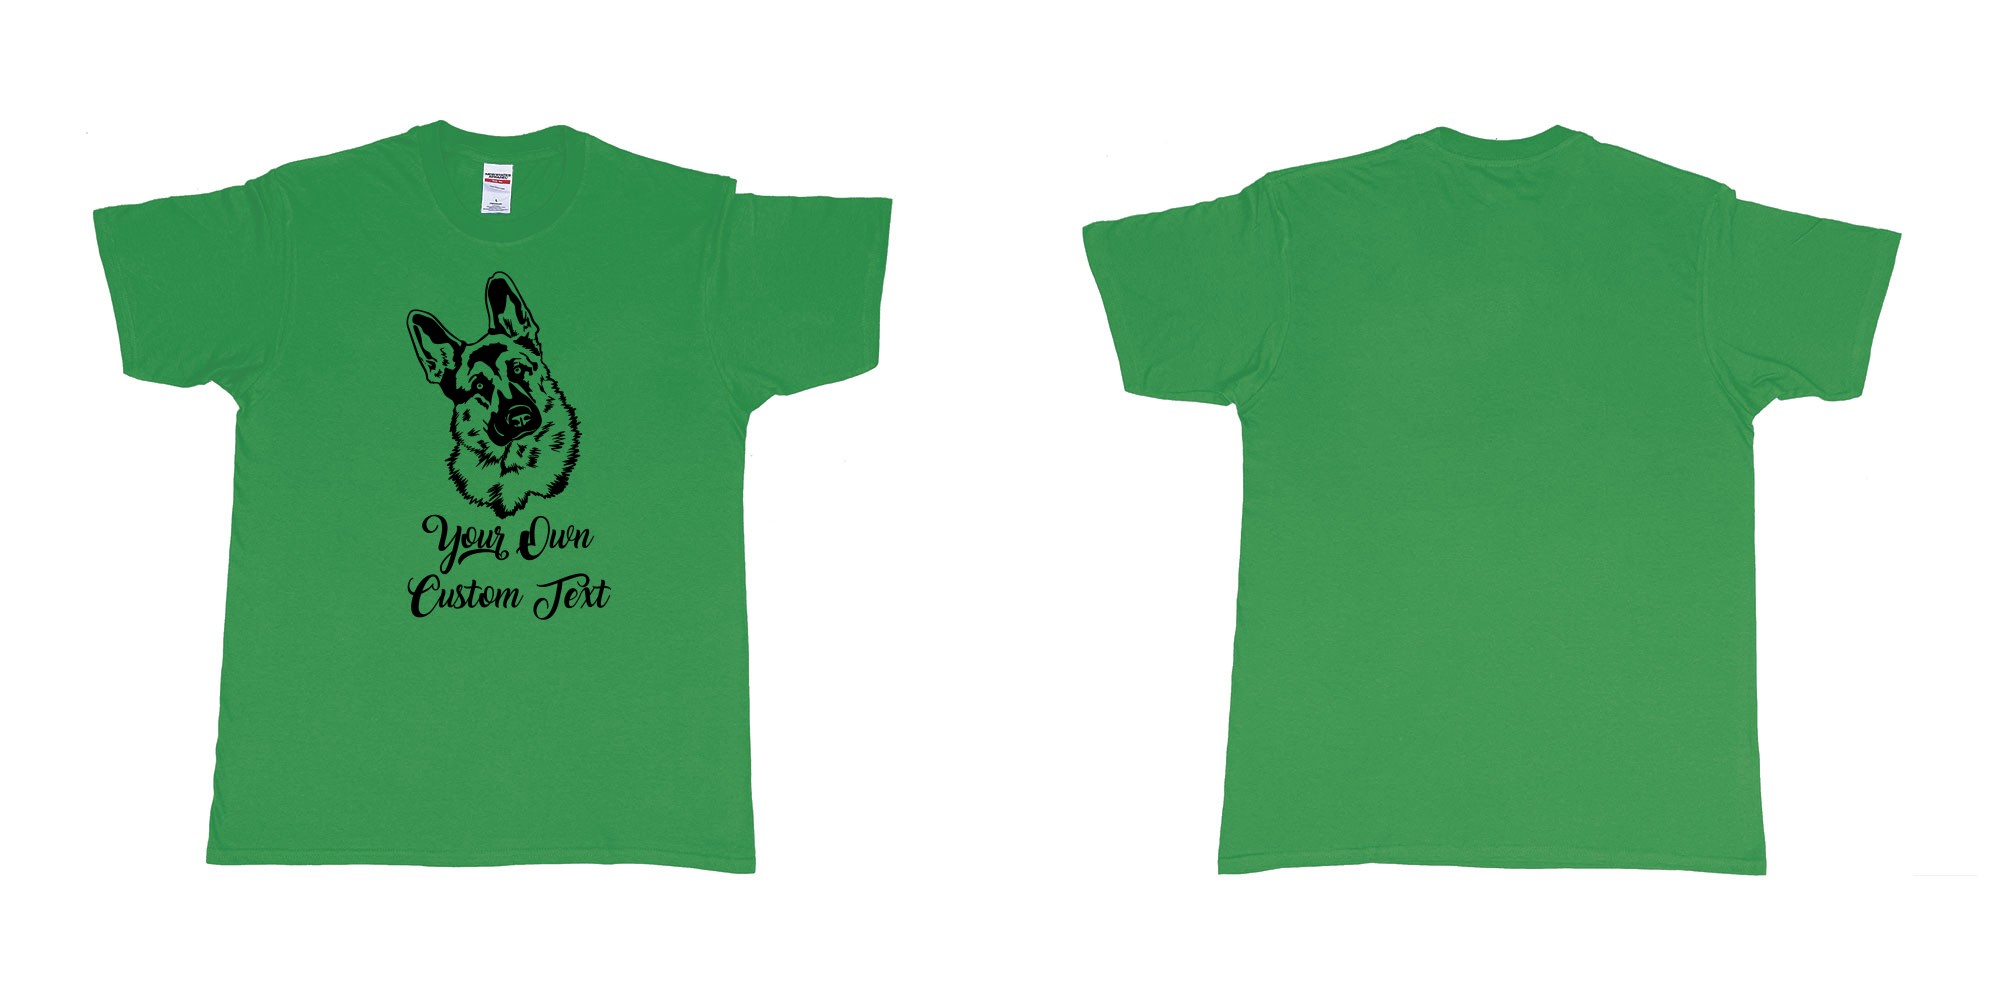 Custom tshirt design zack german shepherd tilts its head your own custom text in fabric color irish-green choice your own text made in Bali by The Pirate Way